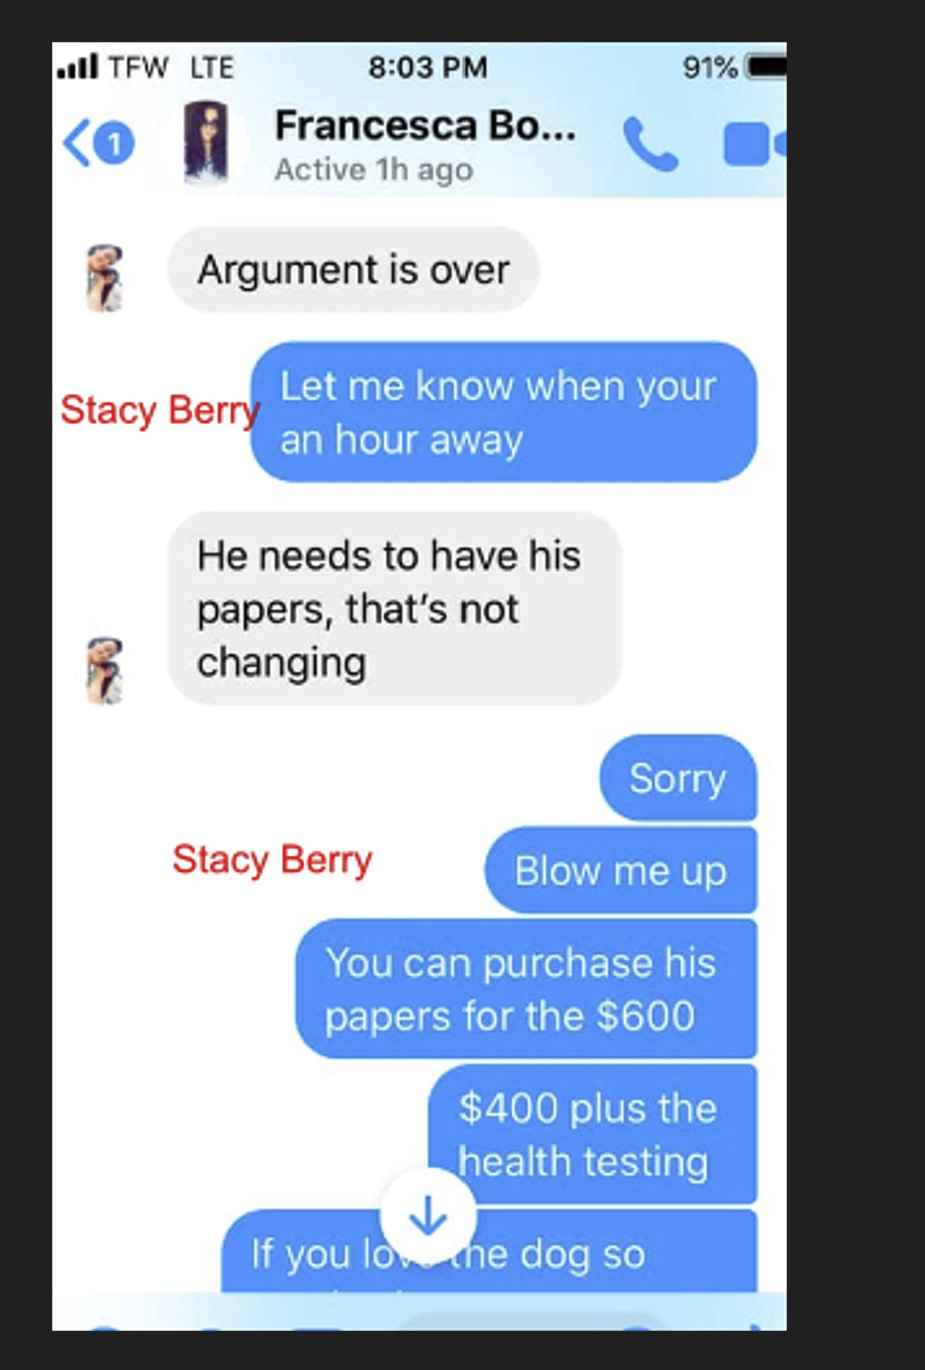 Stacy Berry's text in blue 